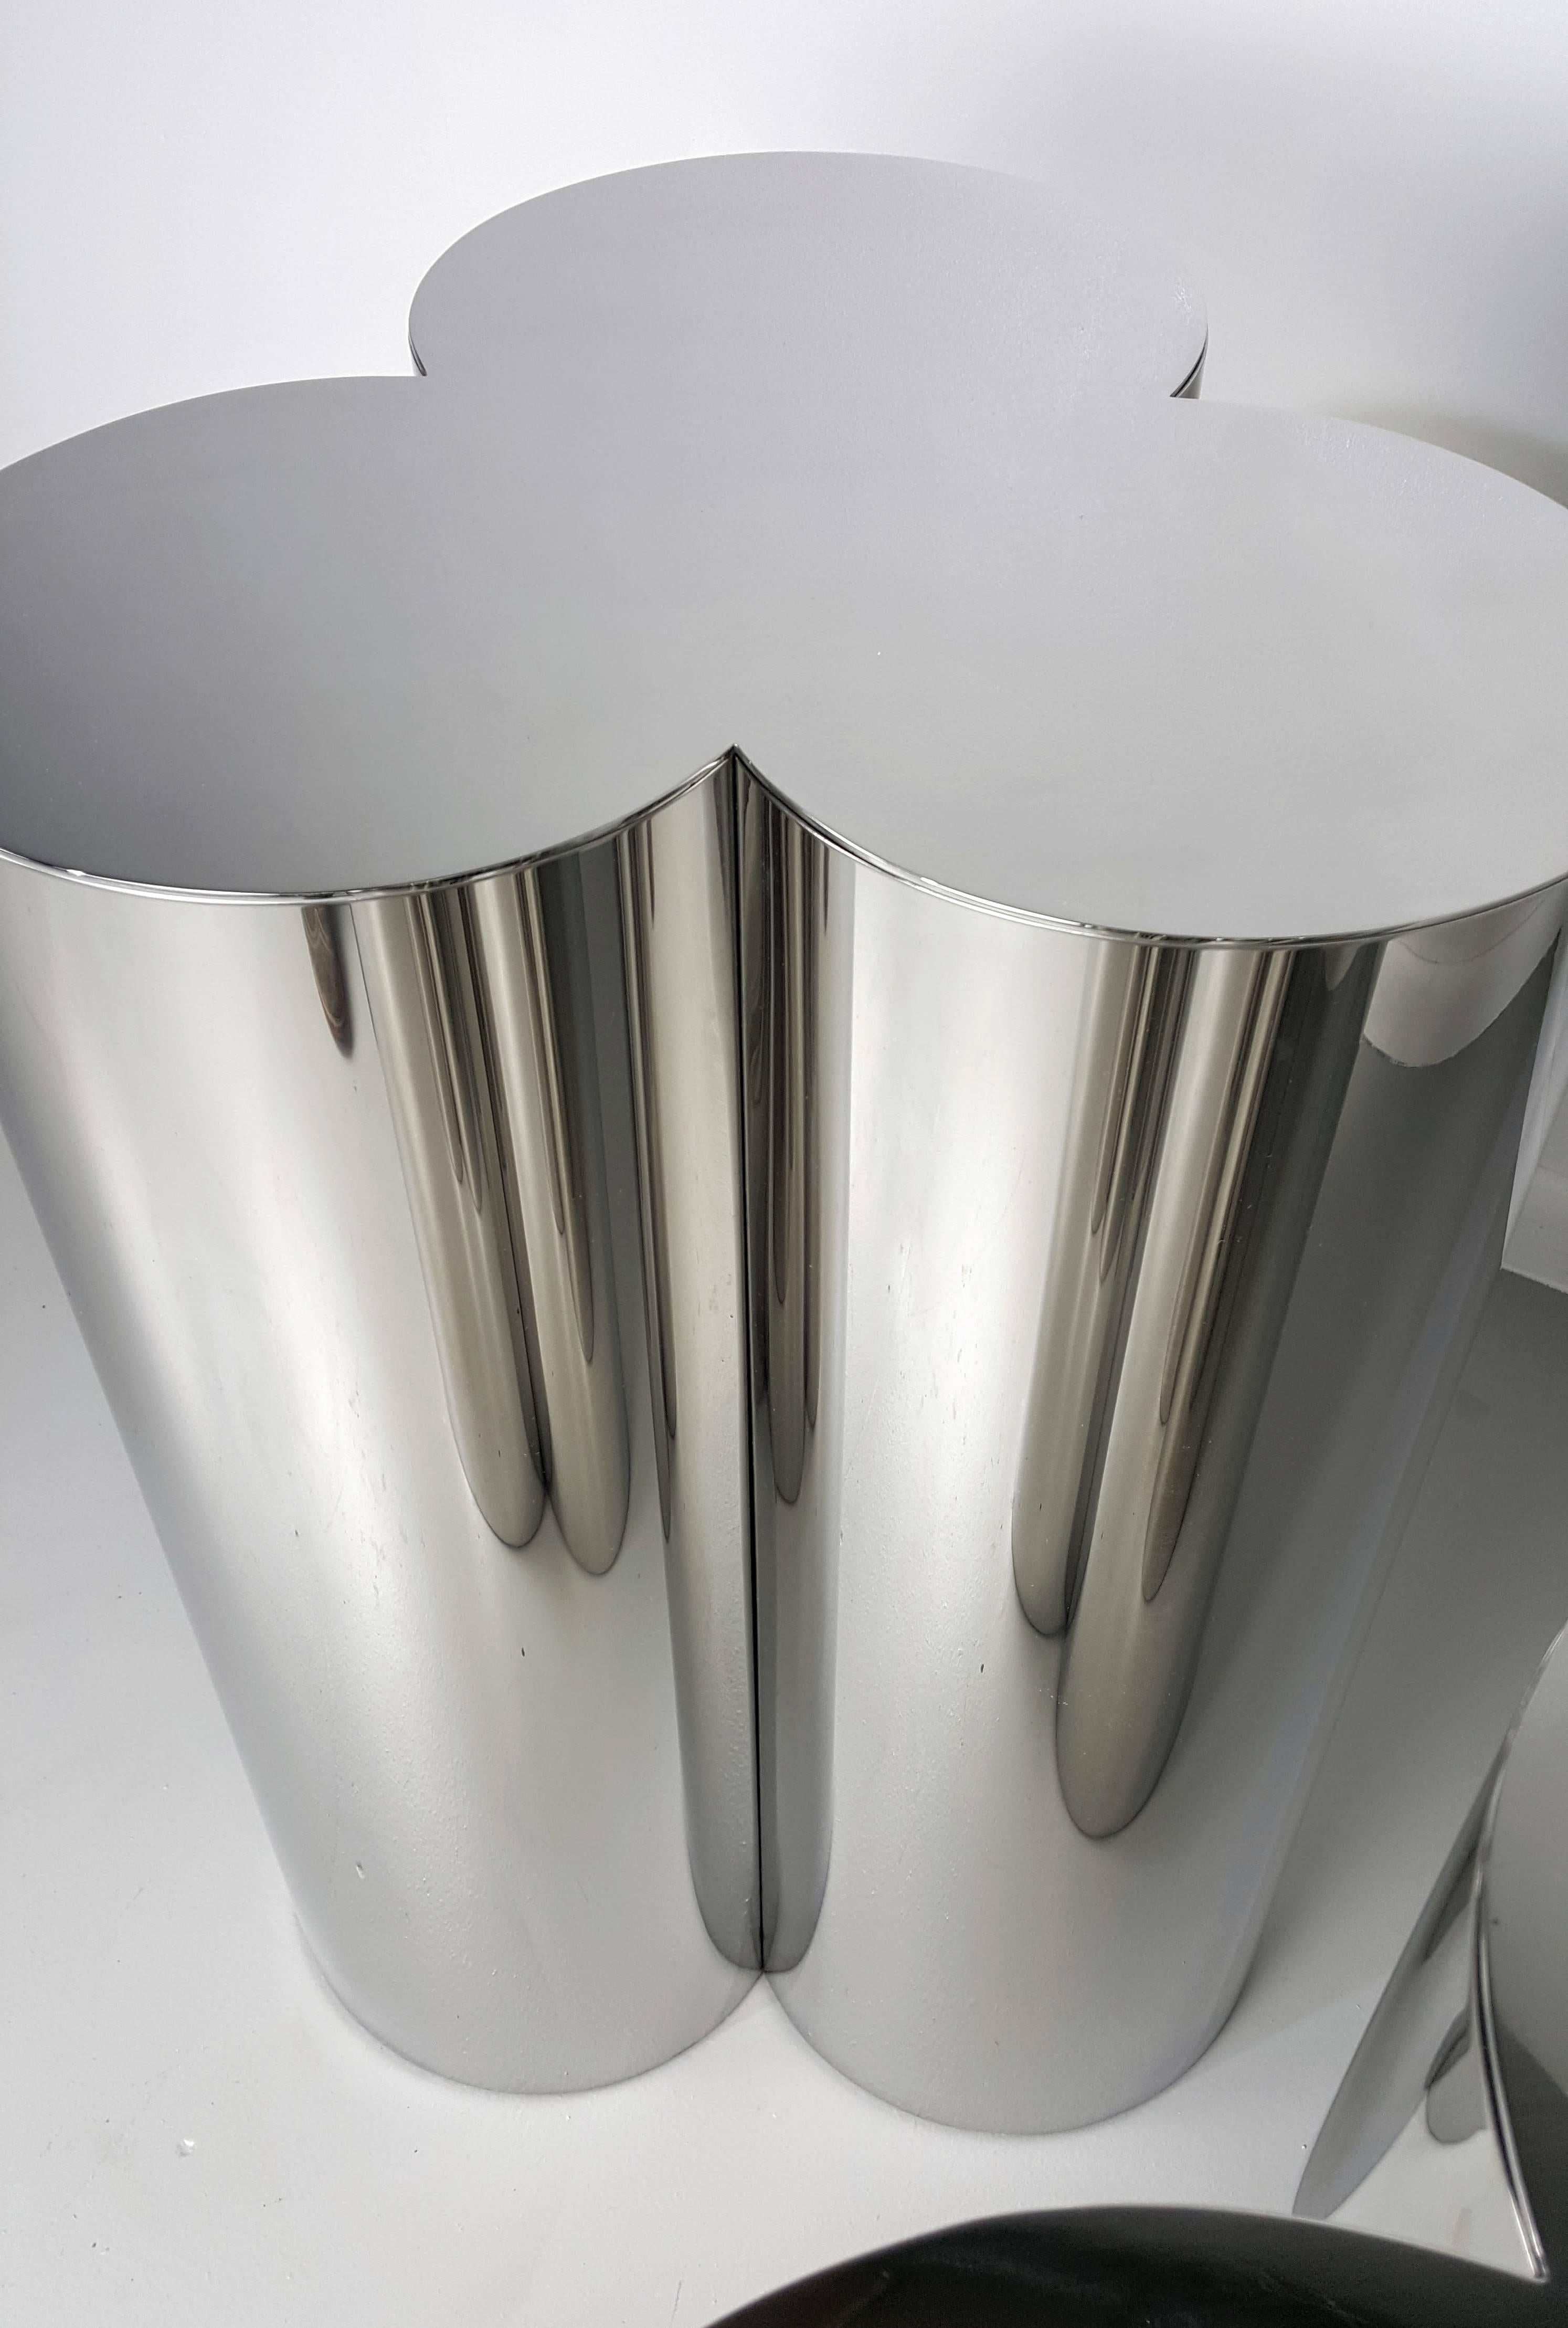 Contemporary Custom Trefoil Dining Table Pedestal Bases in Mirror Polished Stainless Steel